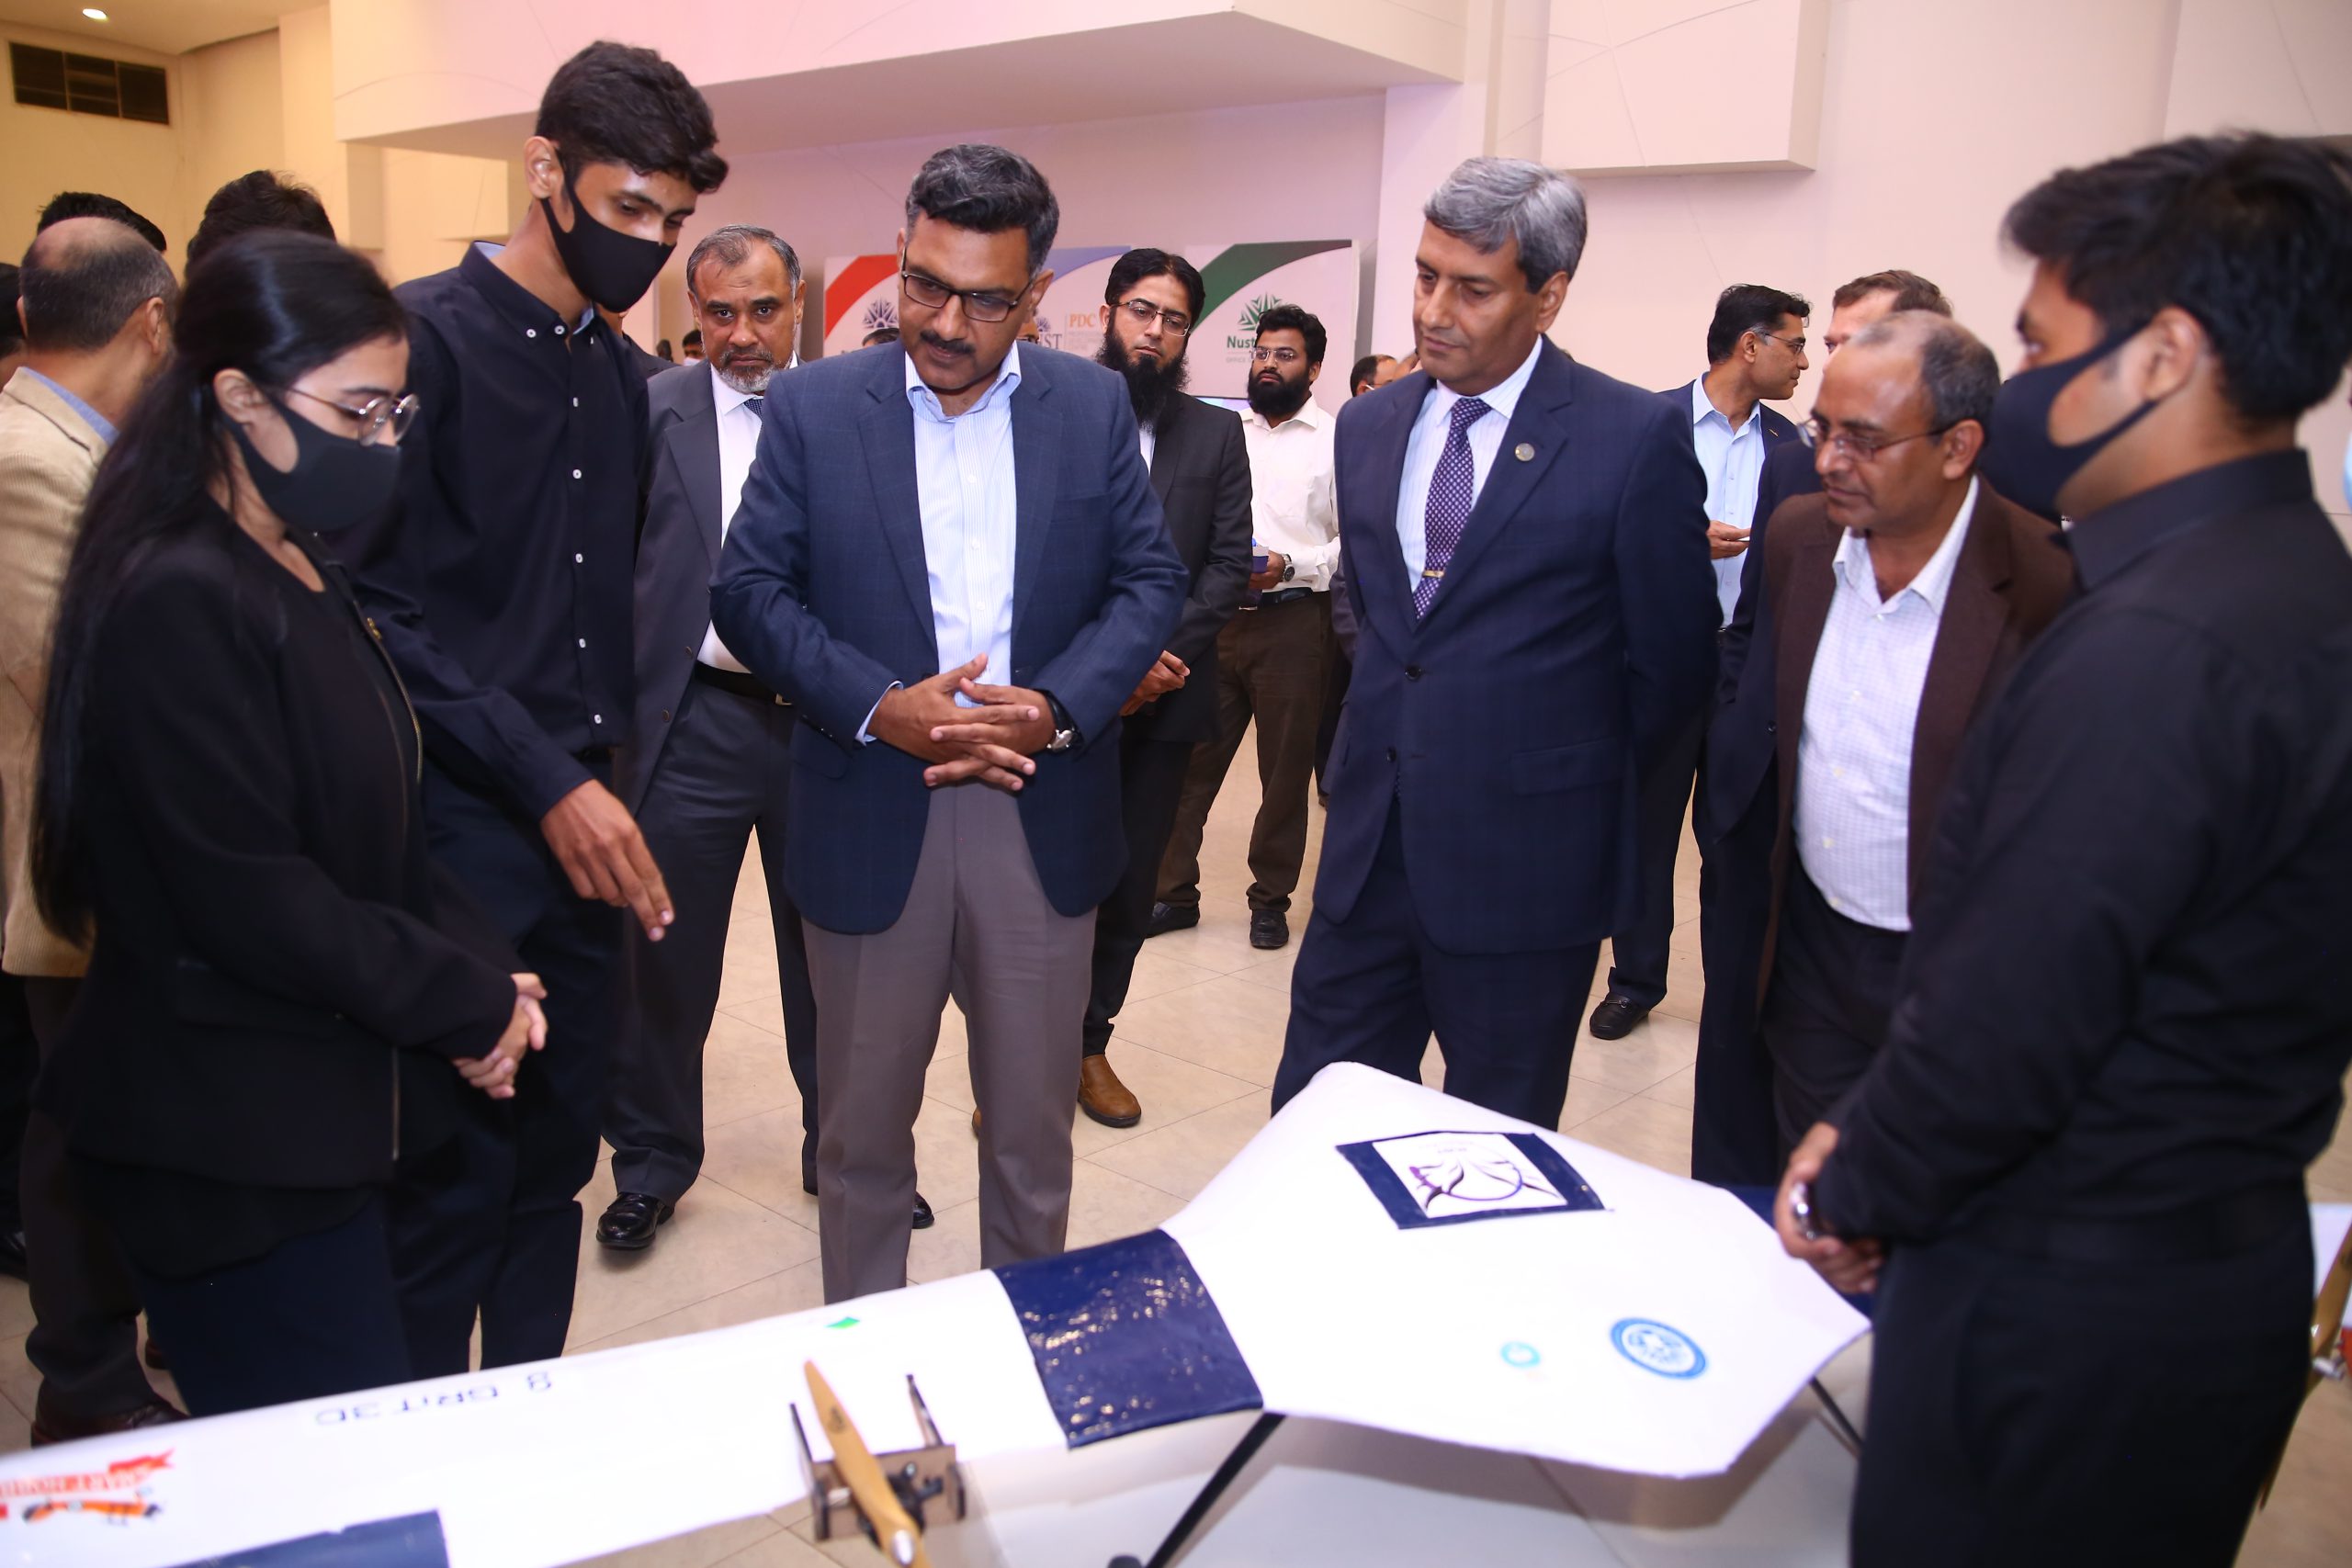 DG Rangers Sindh, Maj Gen Iftikhar Hassan Chaudhary visiting the projects displayed at NUST Karachi Expo accompanied by Dr Rizwan Riaz, Pro Rector RIC